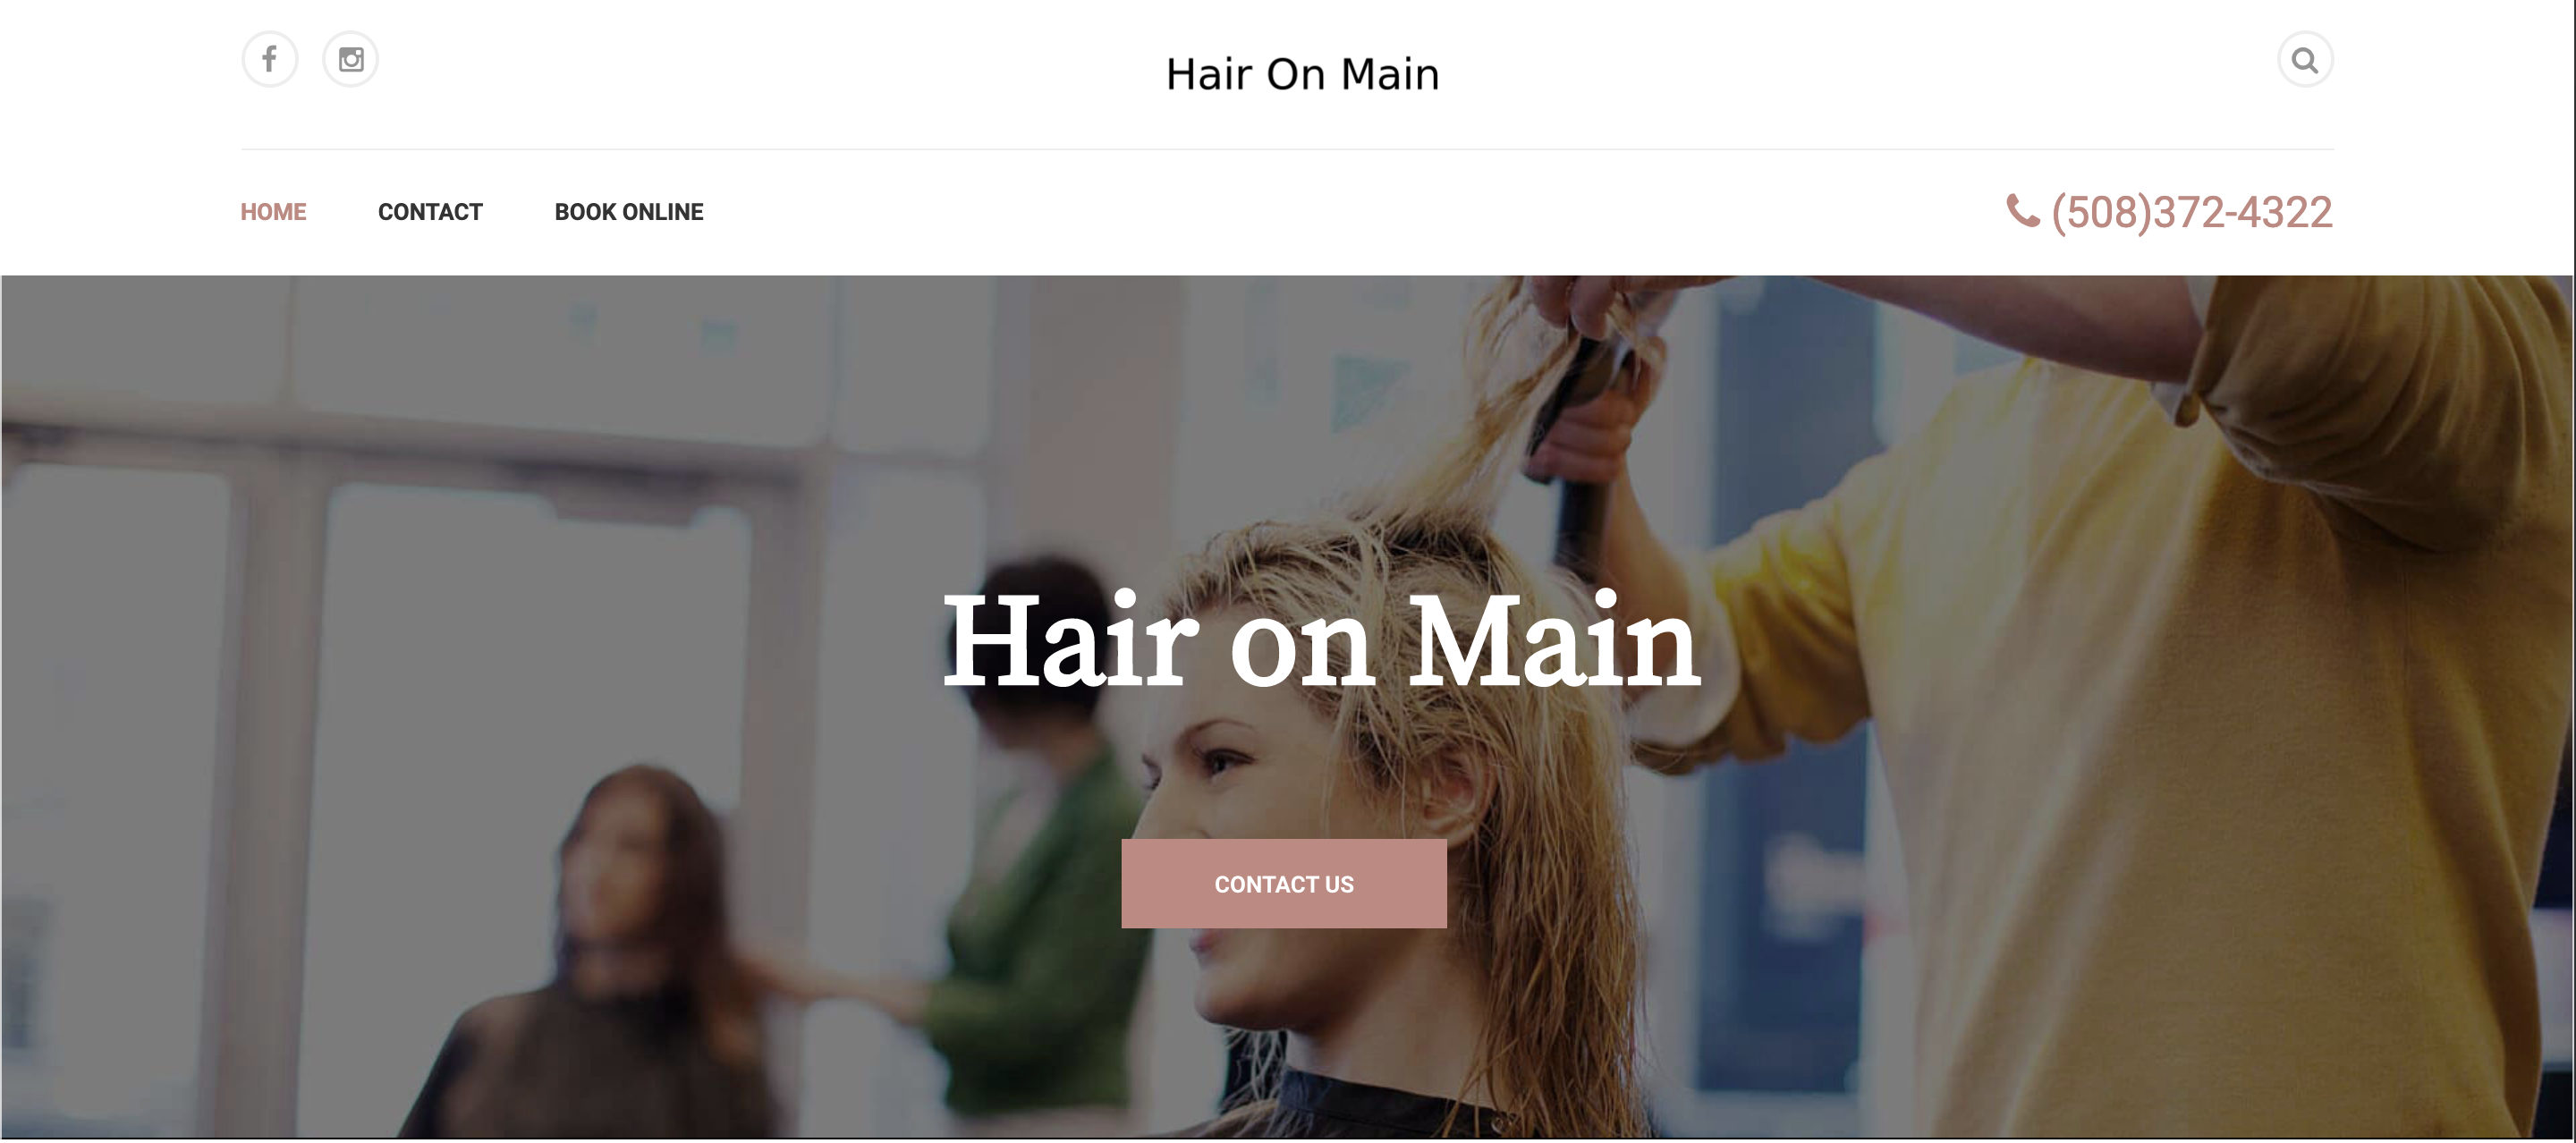 Picture of hair on main Website